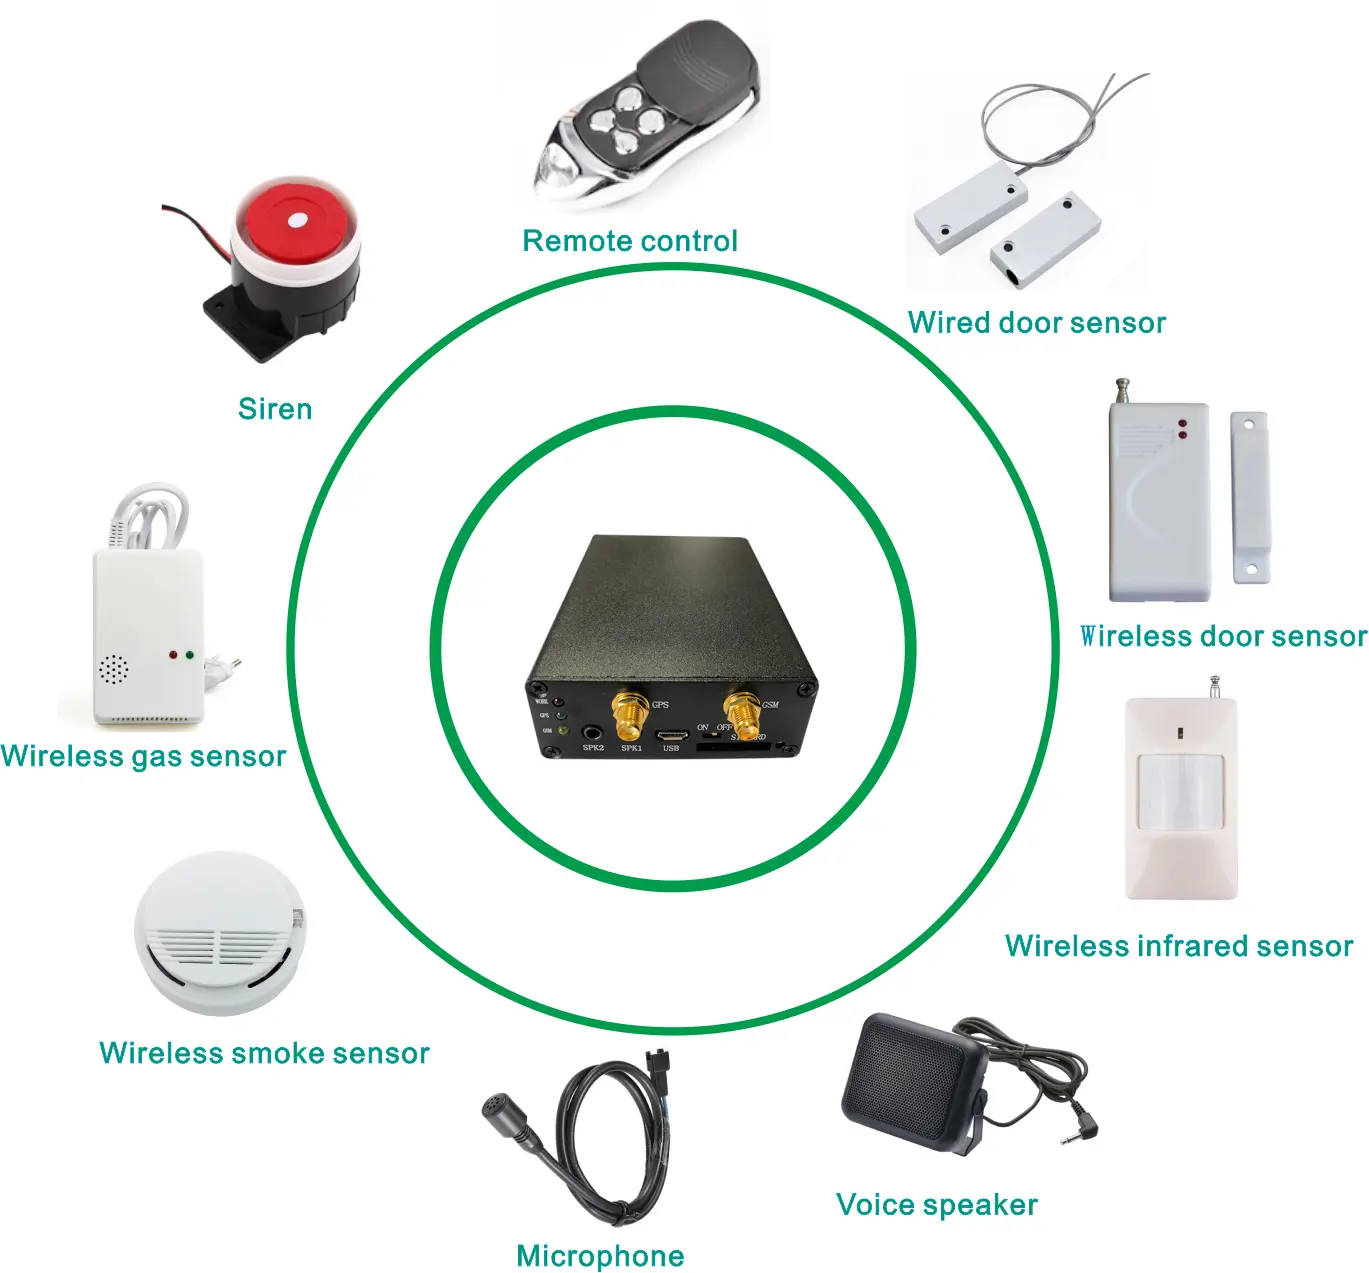 4G LTE Alarm Detection GPS Tracker with remote control and wireless door / wireless smoke / wireless infrared sensor AS201L